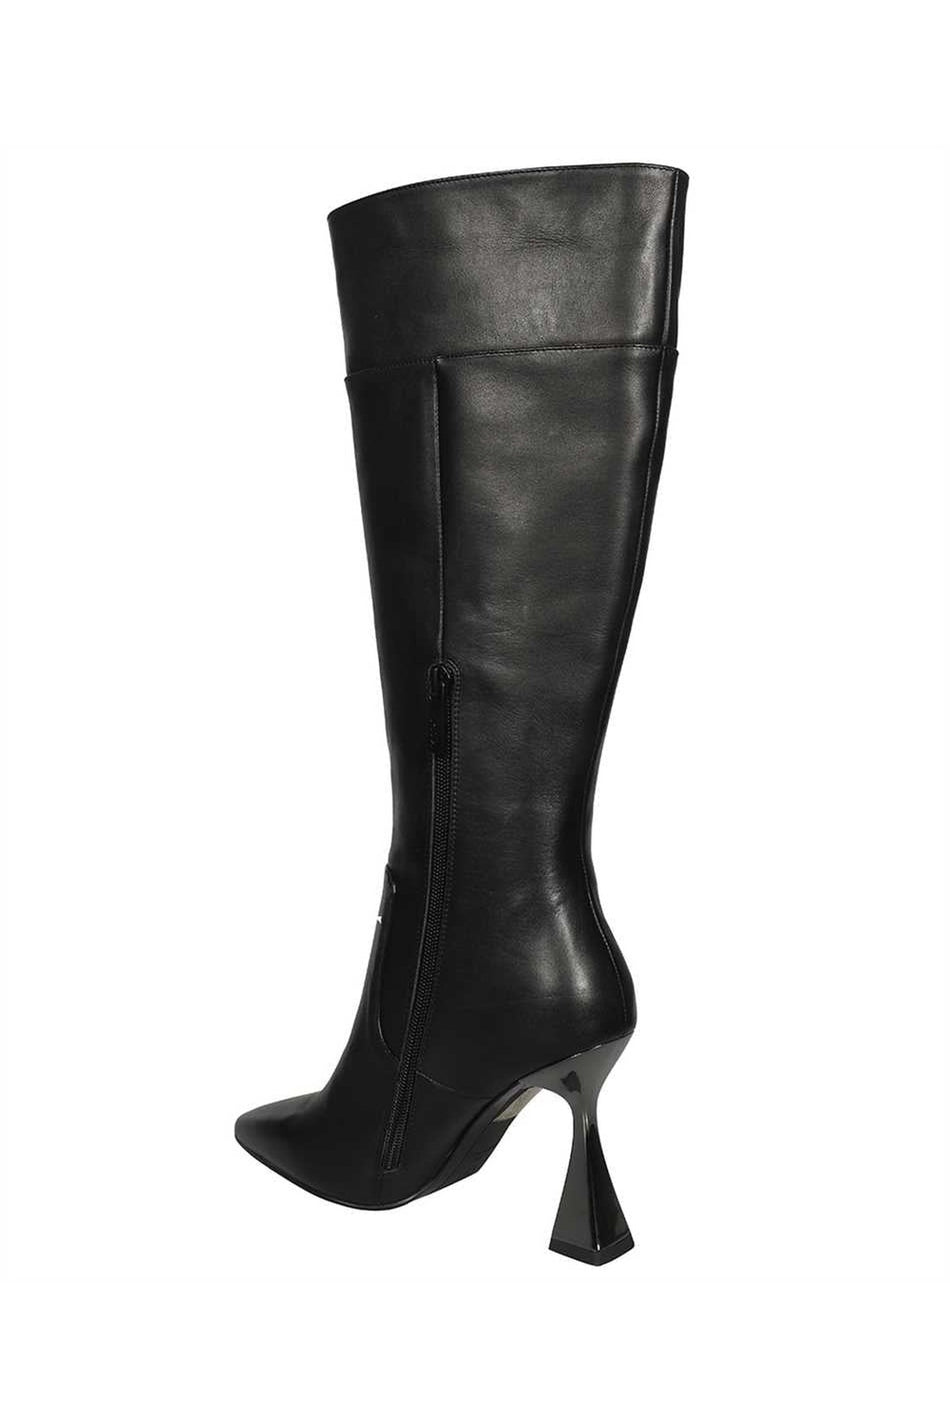 Leather boots-Karl Lagerfeld-OUTLET-SALE-ARCHIVIST